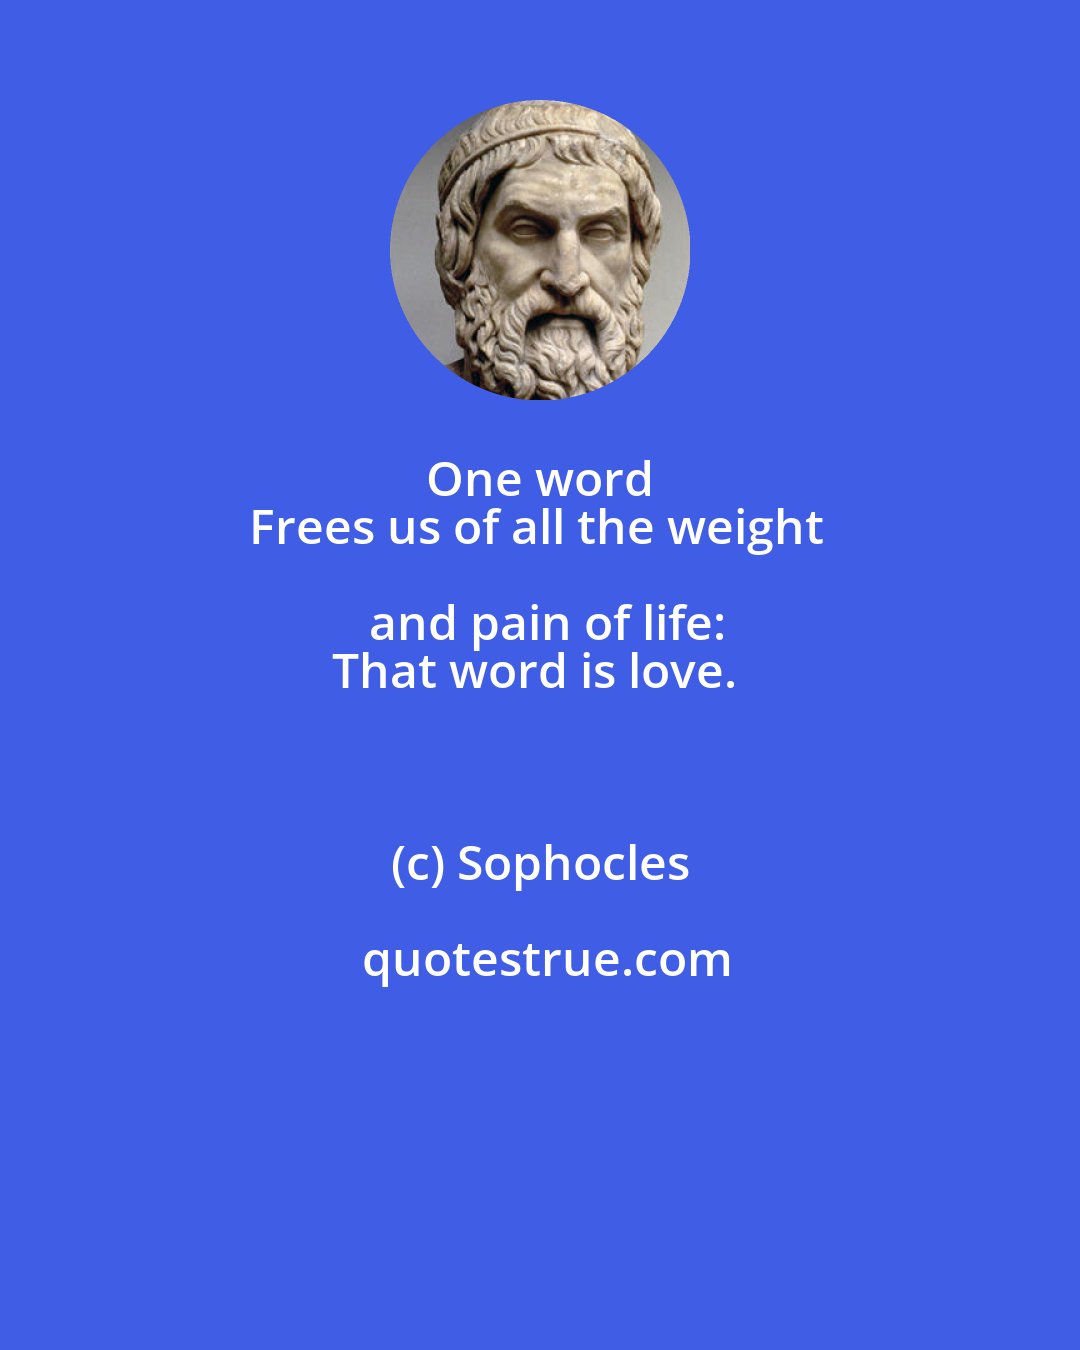 Sophocles: One word 
Frees us of all the weight and pain of life:
That word is love.